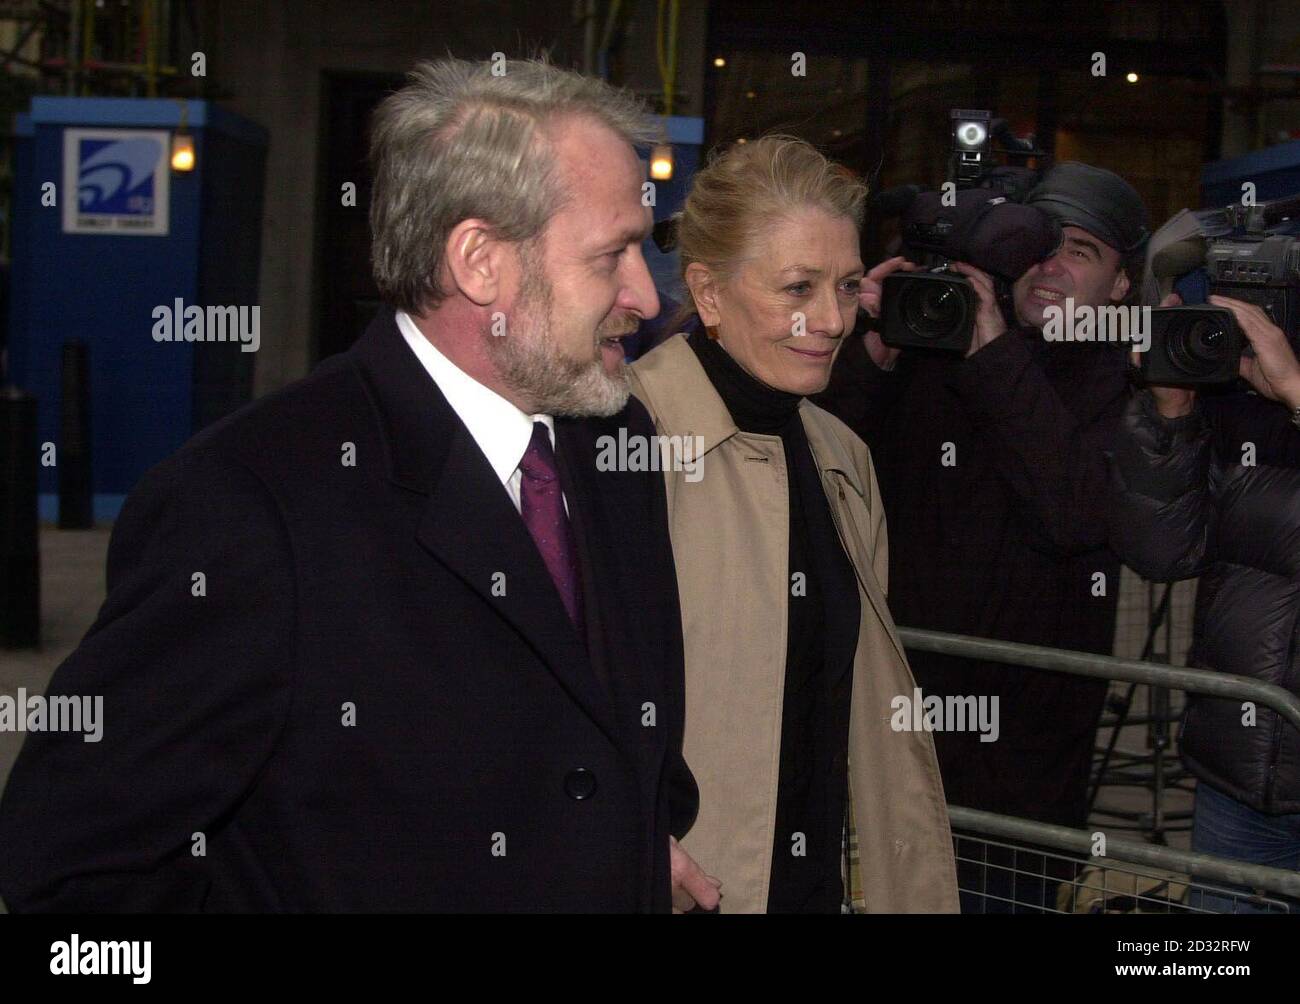 Chechen envoy and actor Akhmed Zakaev, 43, arrives with actress Vanessa Redgrave at Bow Street Magistrates Court, central London.   *   Zakaev, of Chelsea, south west London, is facing allegations of murder, and today begins his extradition hearing. Russian authorities want to extradite him on charges including levying war and at least 302 murders. Stock Photo